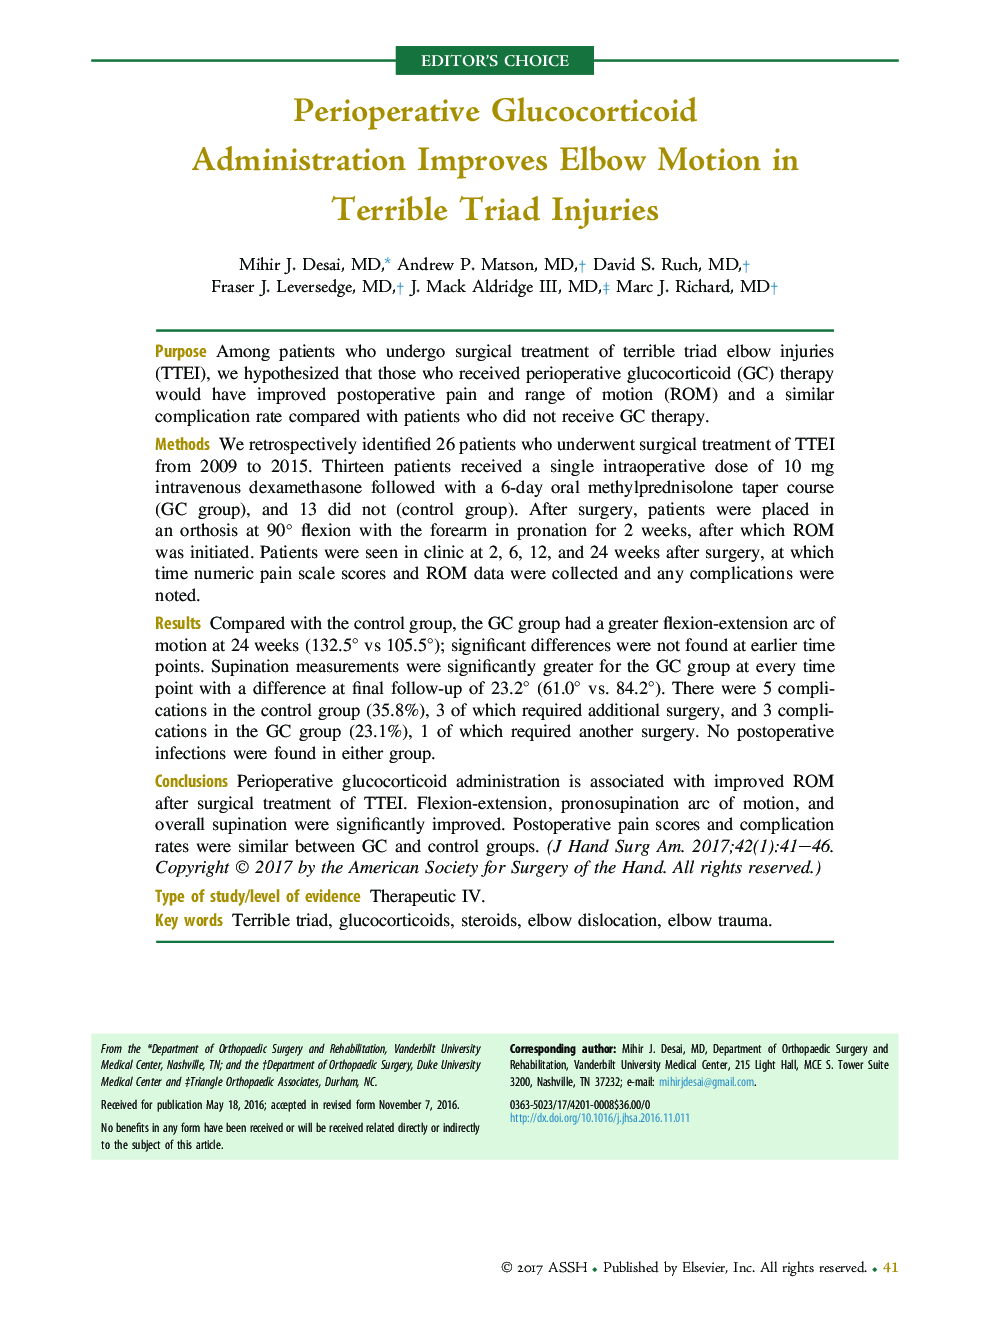 Perioperative Glucocorticoid Administration Improves Elbow Motion in Terrible Triad Injuries